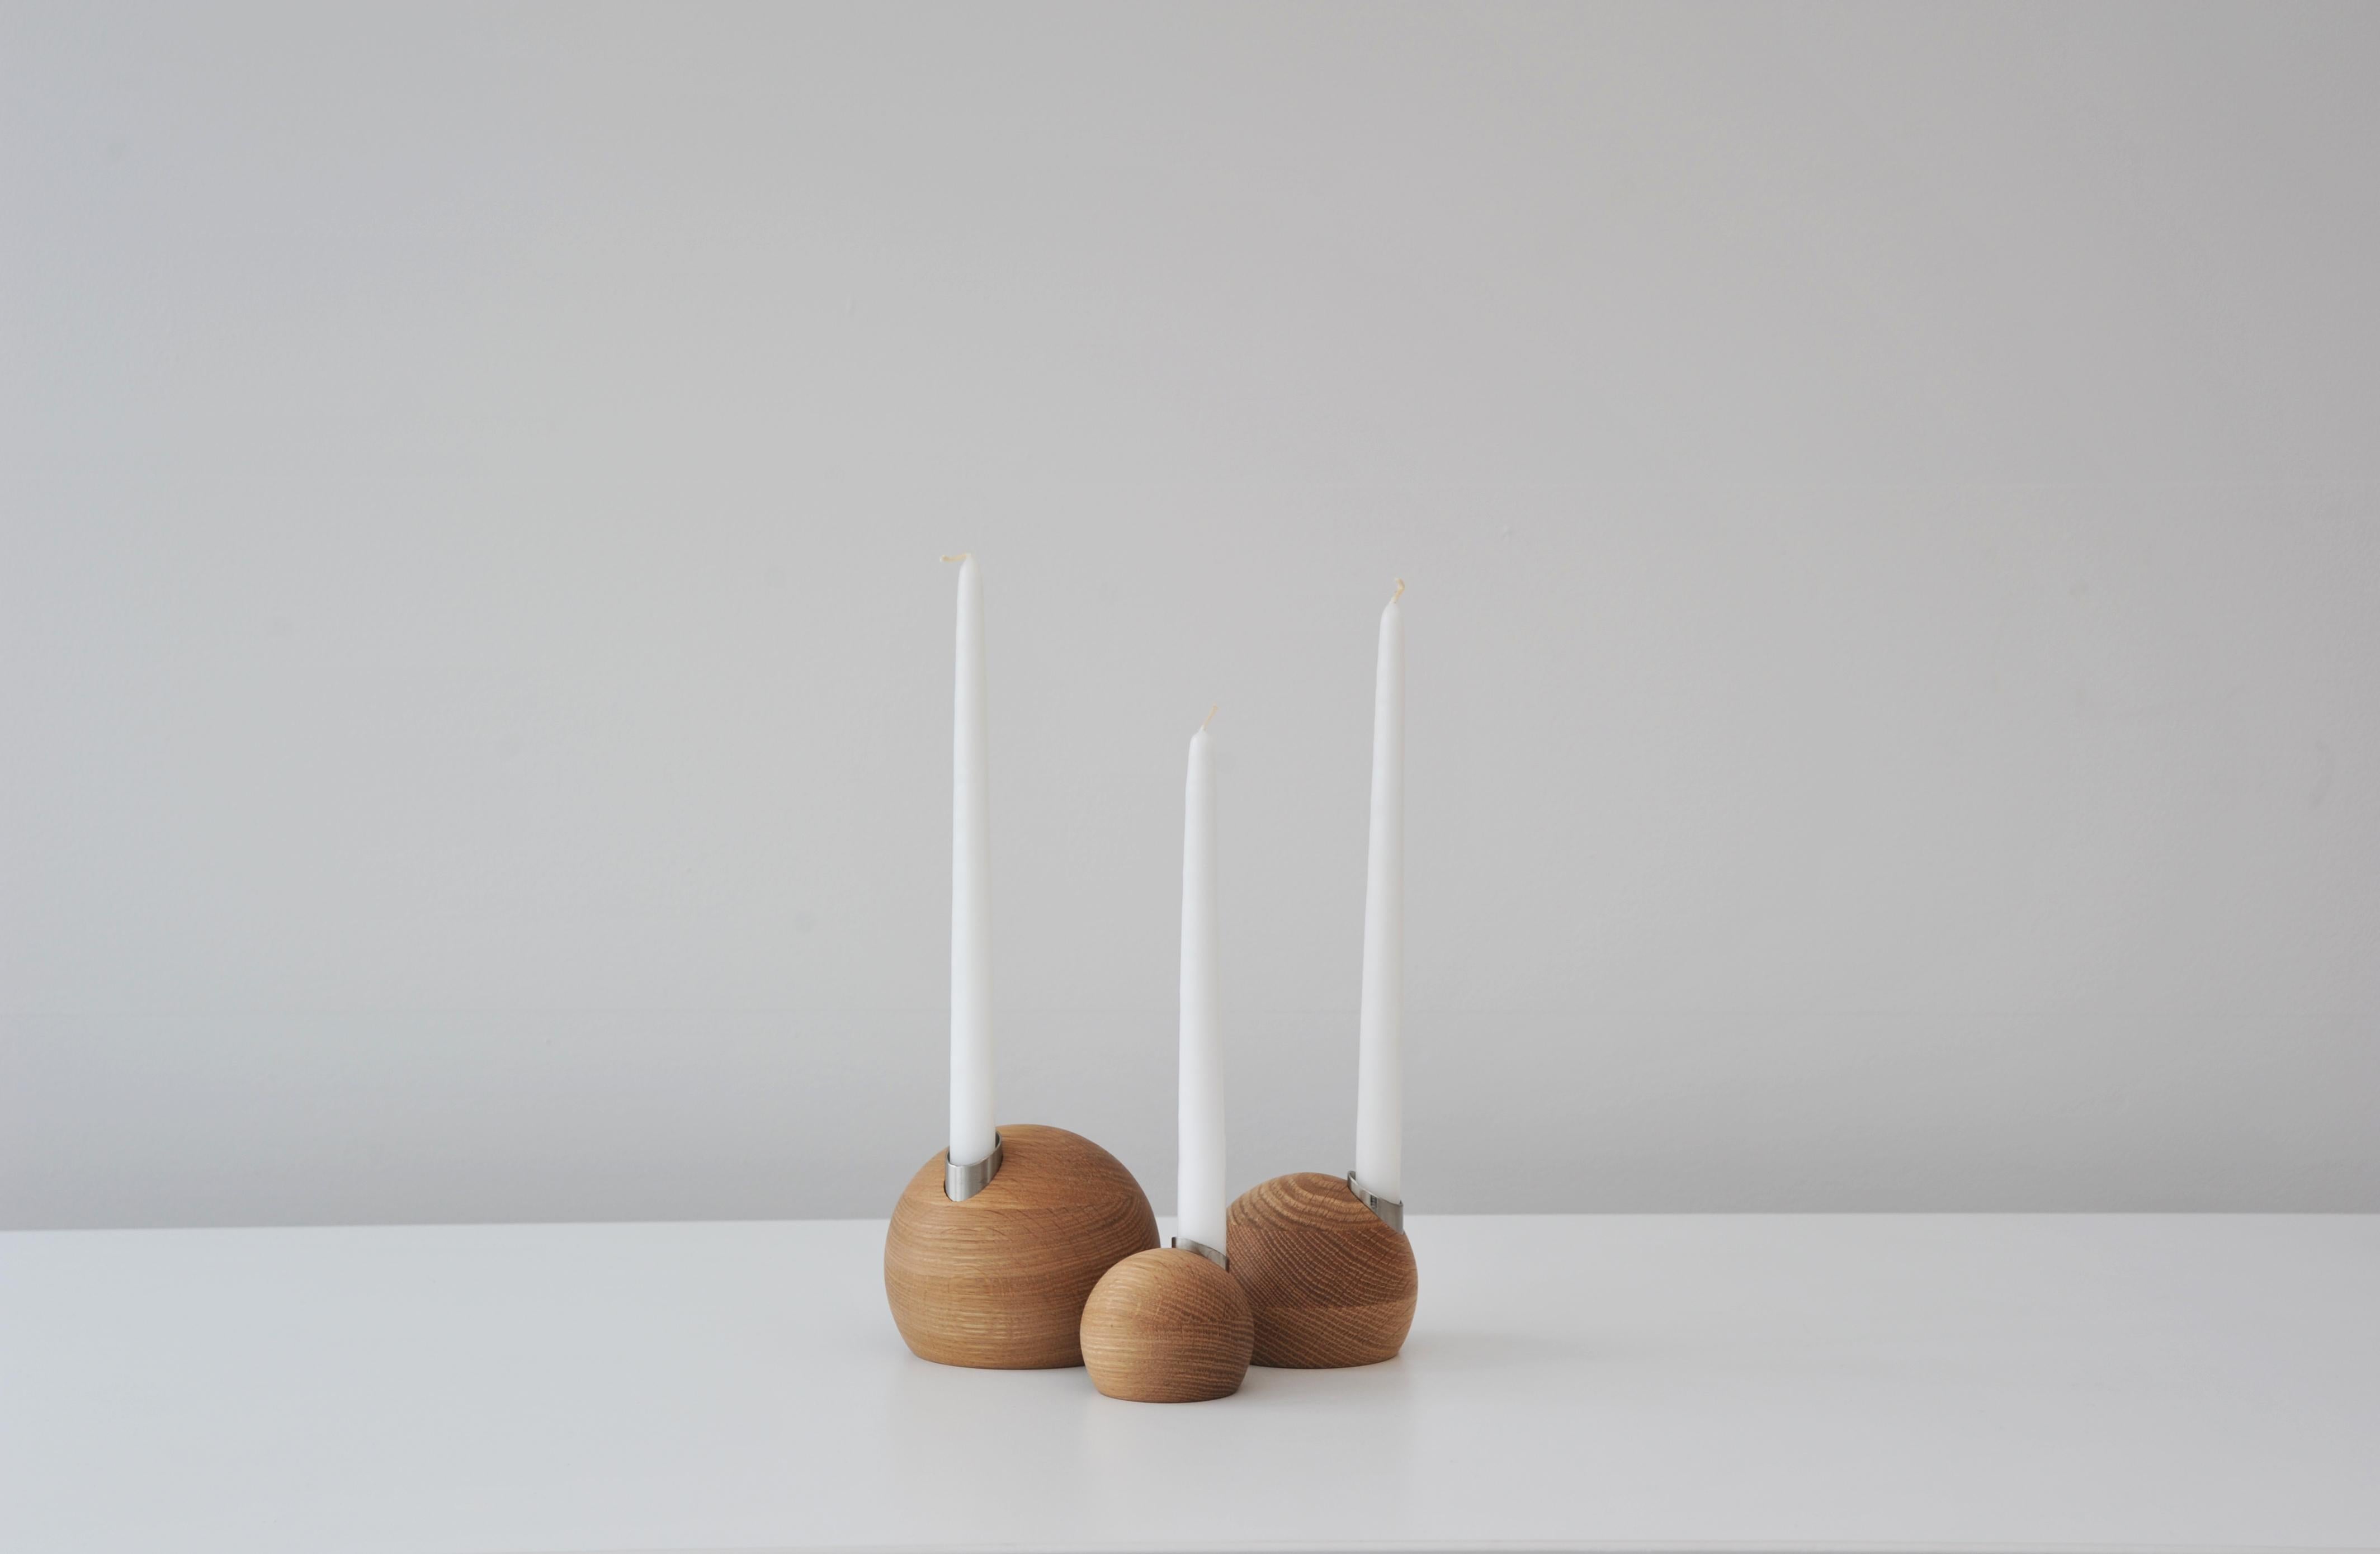 Set of 3 pebble candle holders by Hollis & Morris
Dimensions: 
Small diameter 3